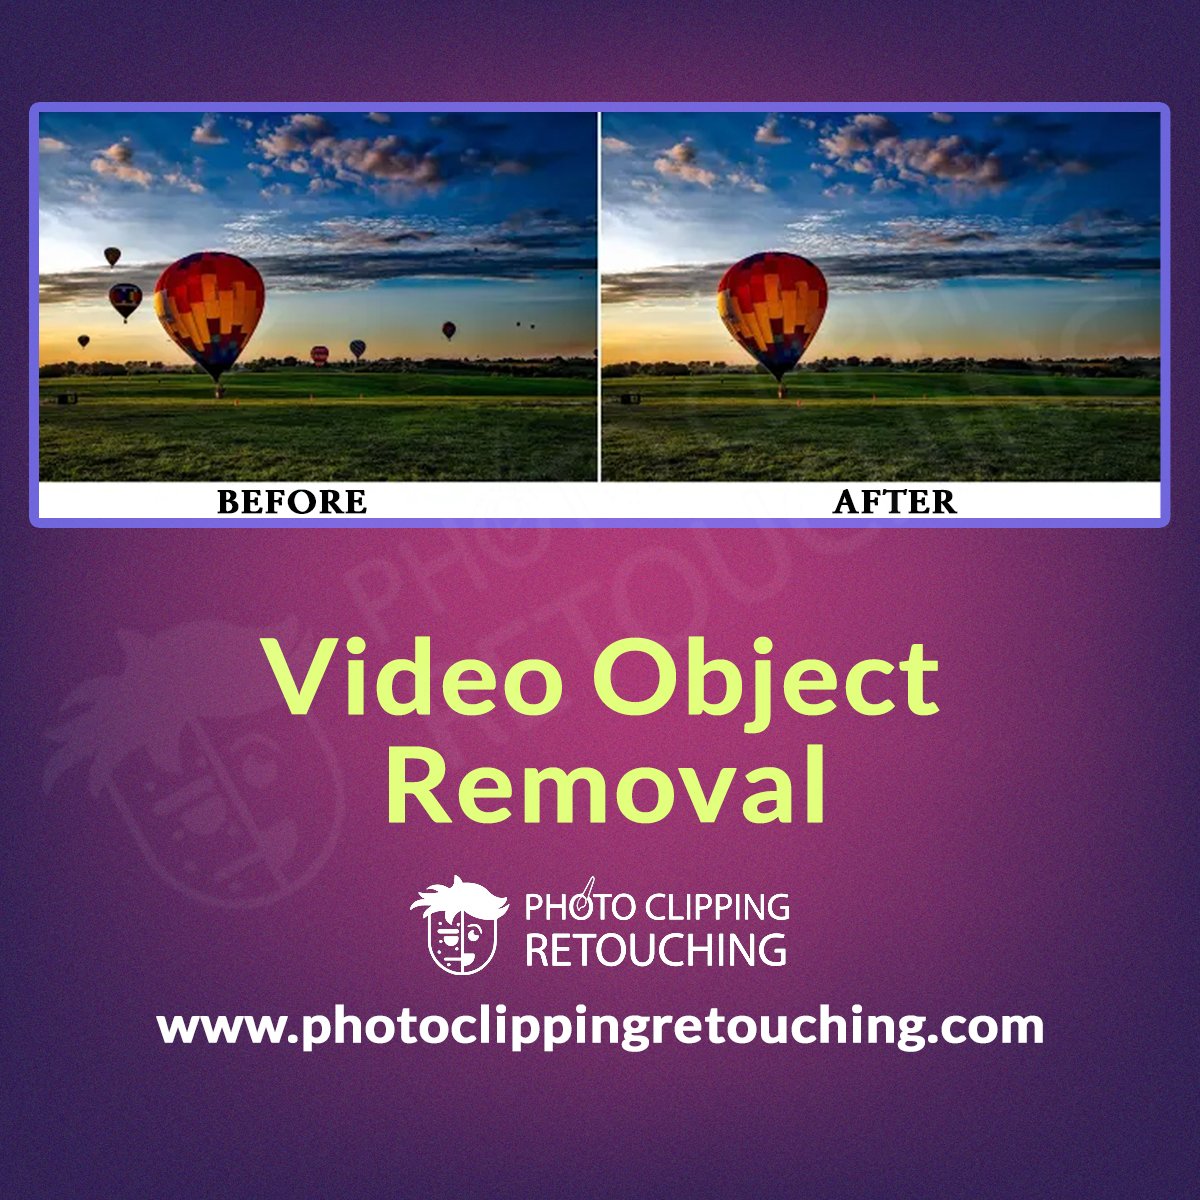 Remove distractions for seamless storytelling with our Video Object Removal! #ObjectRemoval #CleanVideos #VisualPerfection #SleekVideos #BeforeAndAfter #VideoEditing #EditingServices #GraphicDesign #teamPCR Email: info@photoclippingretouching.com Link: photoclippingretouching.com/video-object-r…